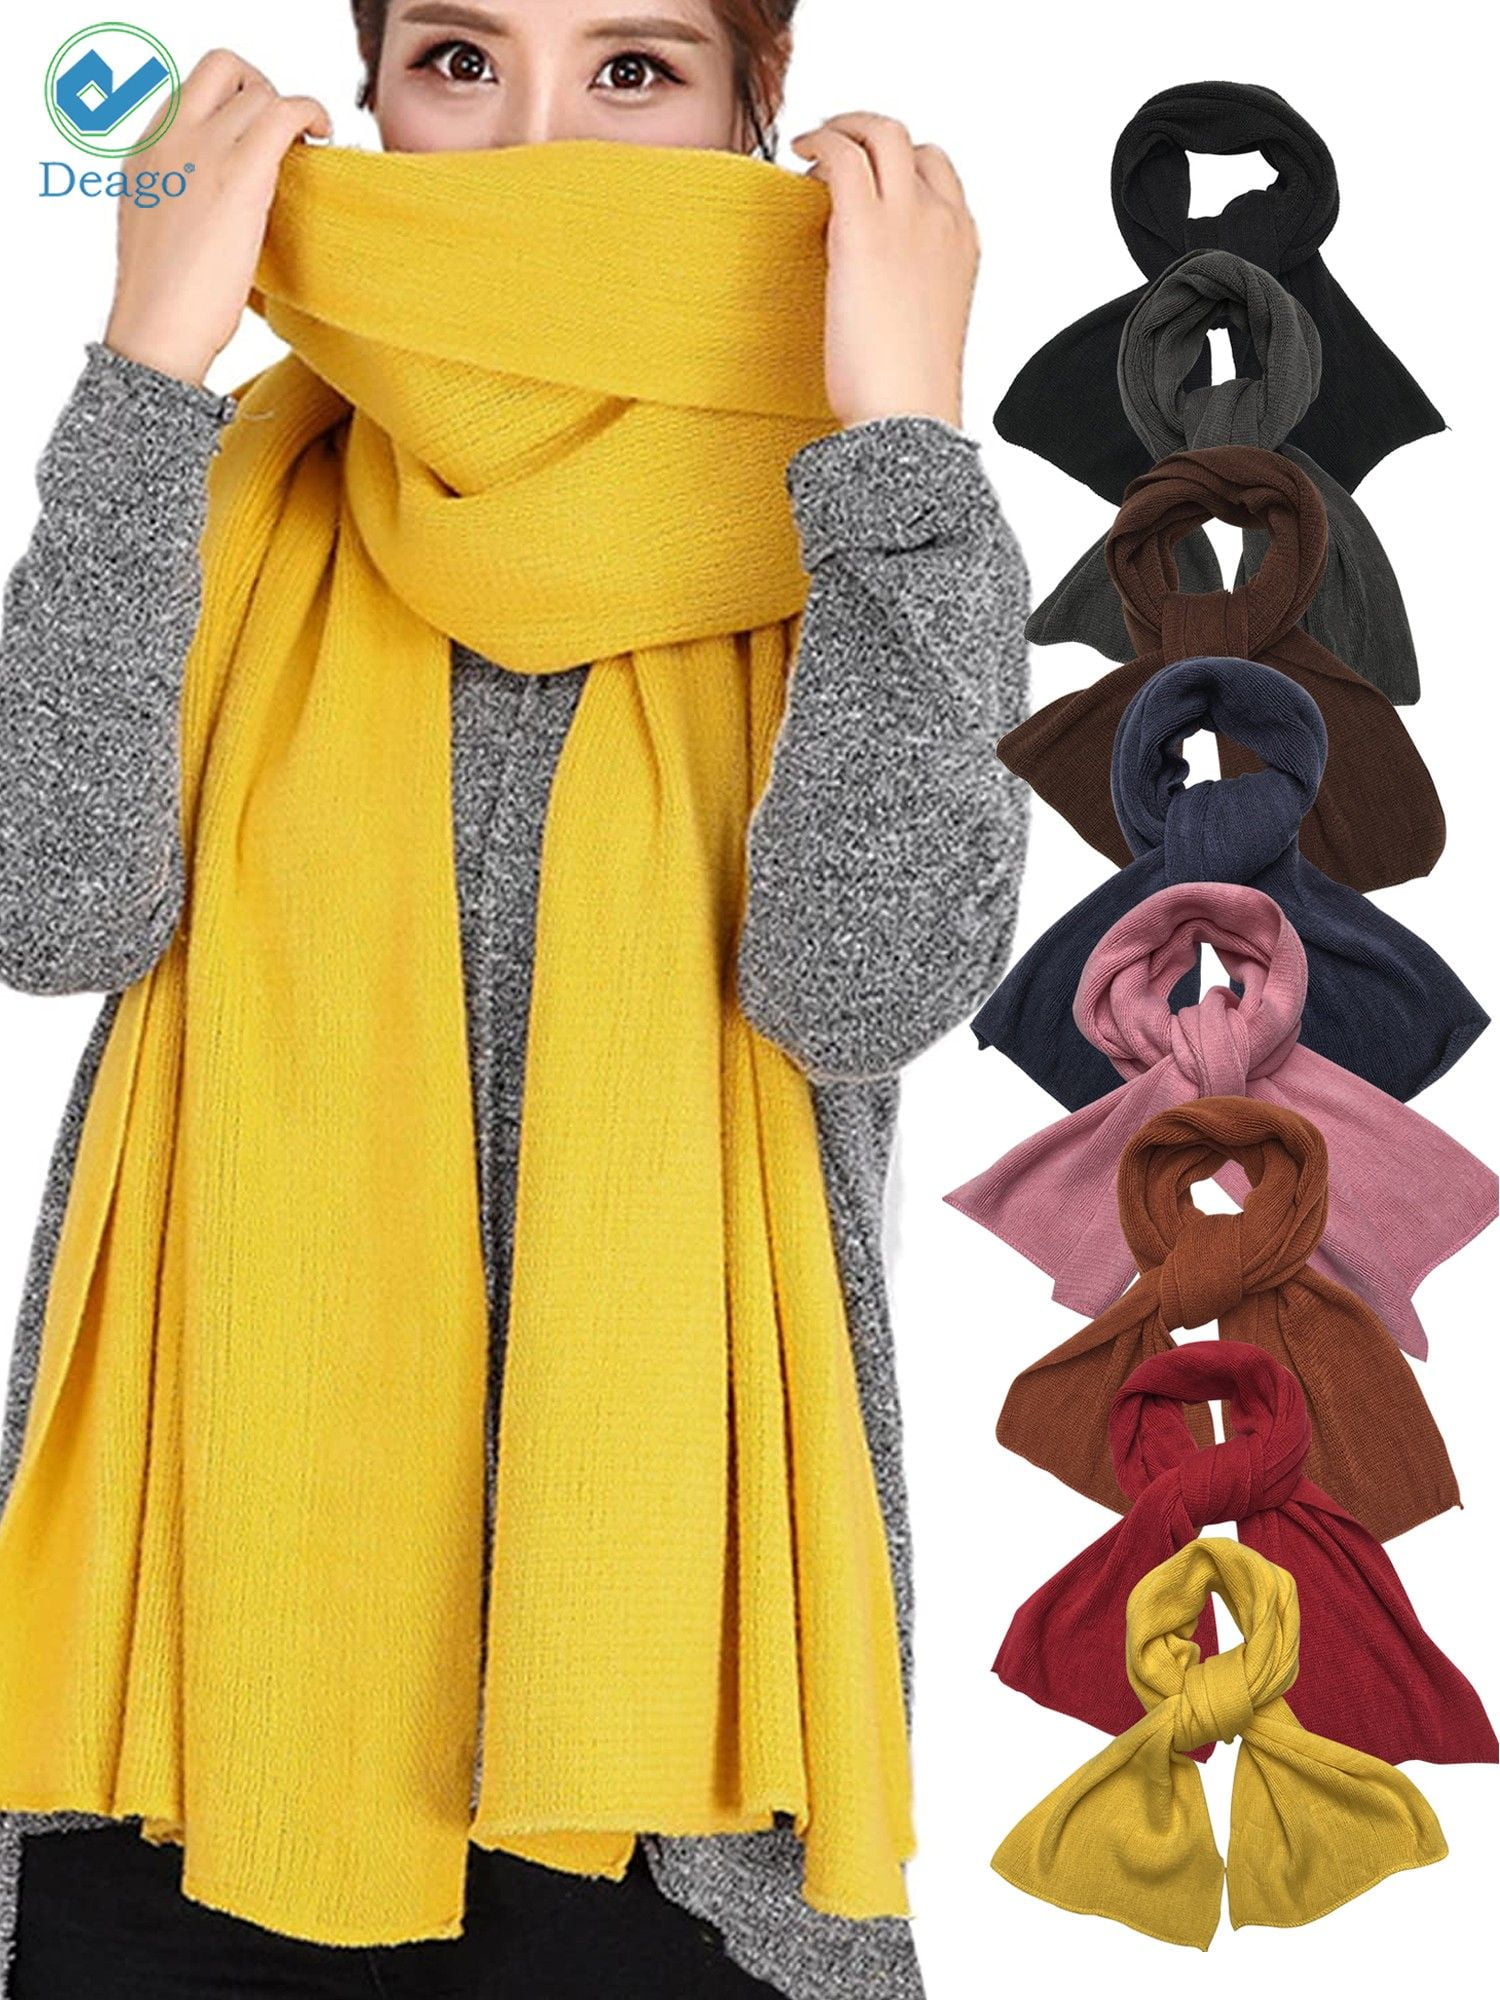 Infinity Scarf  Blanket Scarf  Free Shipping  Ready to Ship  in Wine